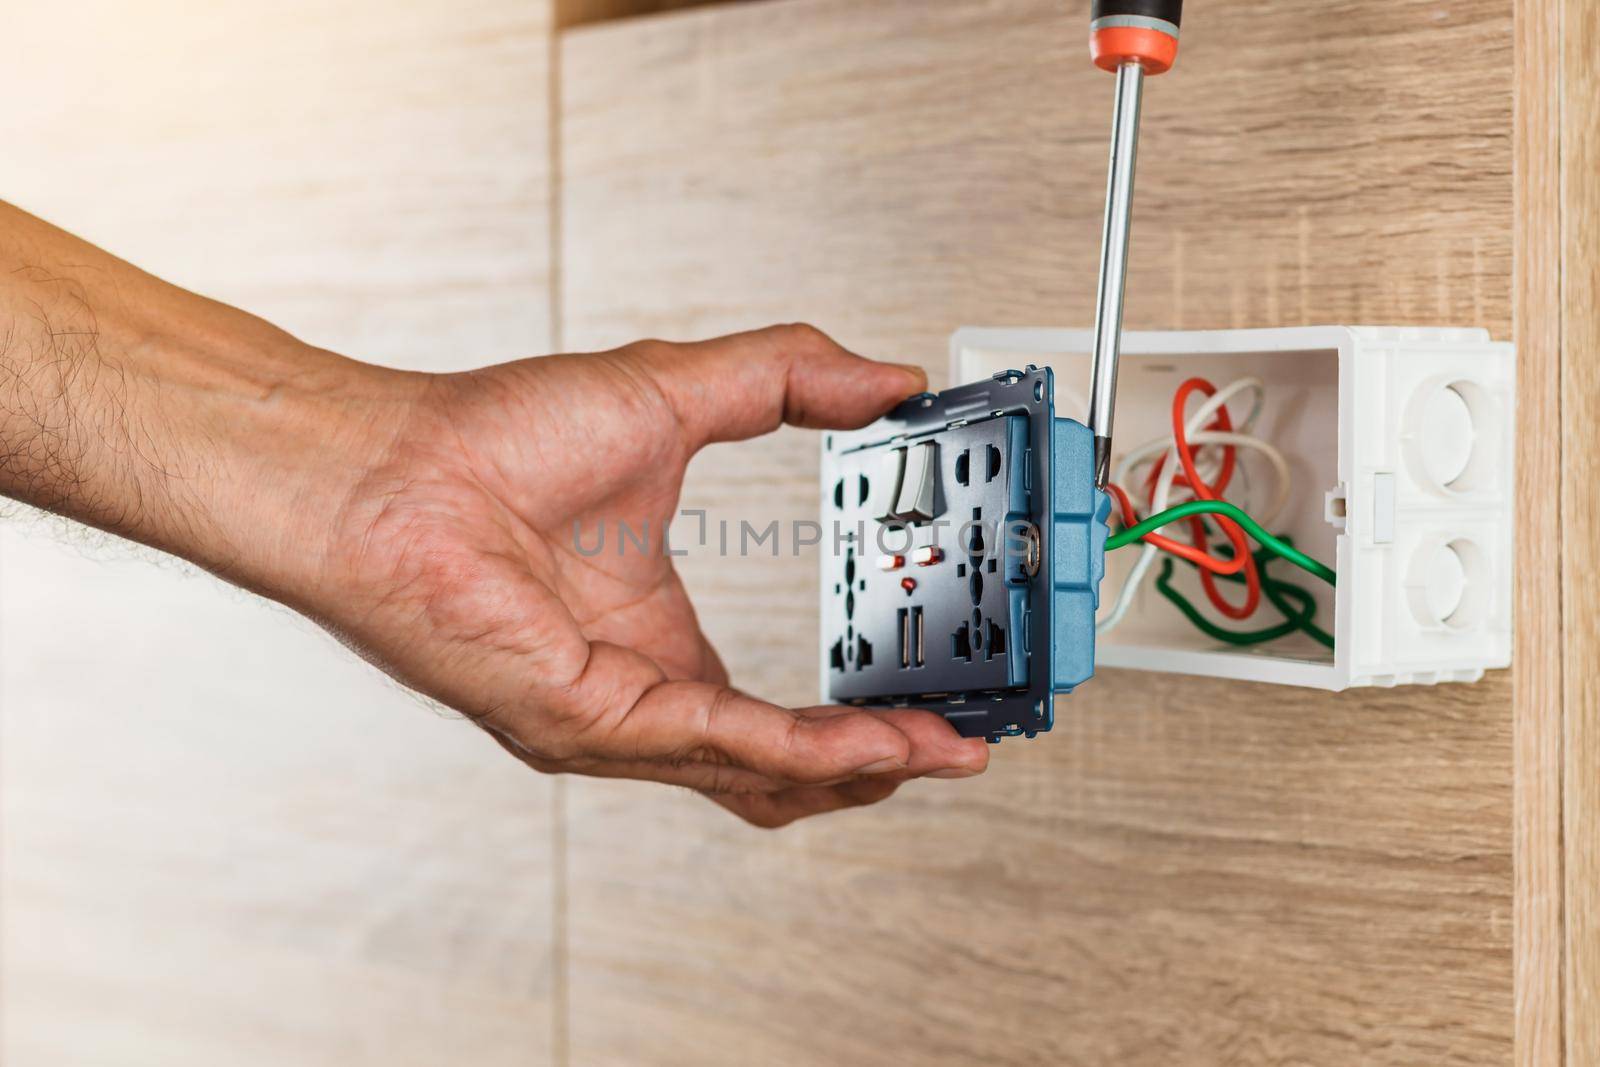 Hand of an electrician is using a screwdriver to attach the wires to the universal wall outlet AC power plug with USB port and on-off in a plastic box on a wooden wall.